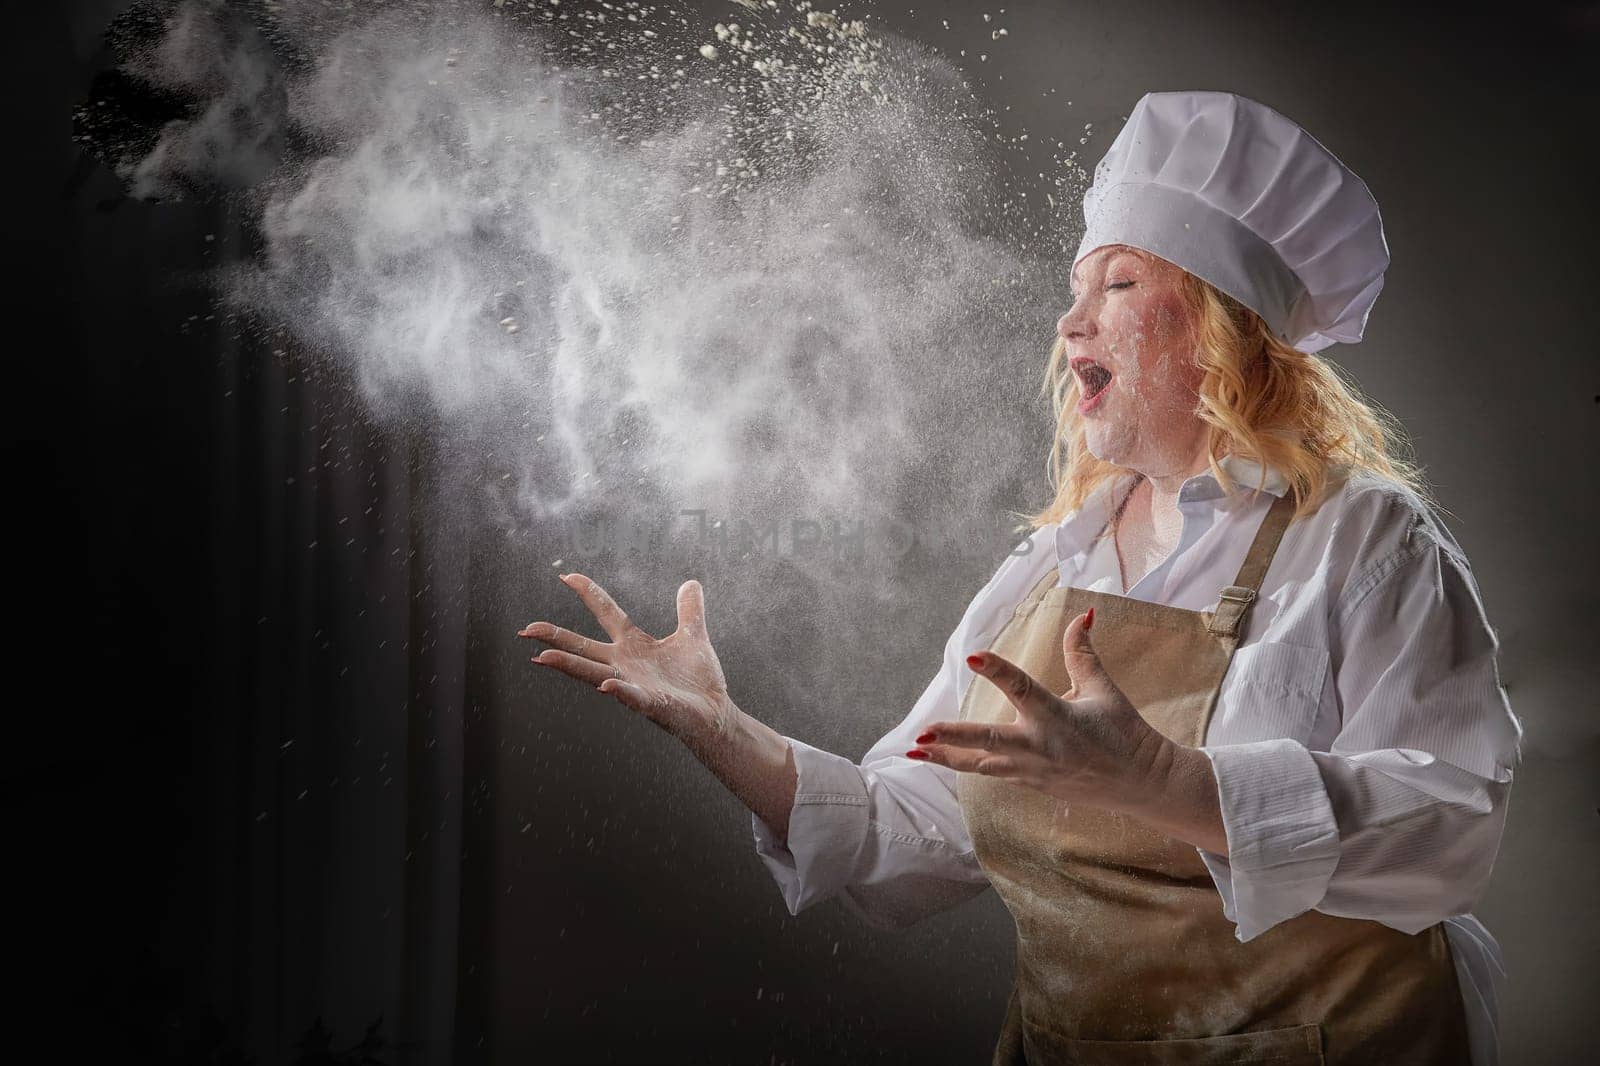 Fat funny female cook in a hat and apron posing and taking selfie in the kitchen with flour. Cooking, body positive, cloud, smoke, flour